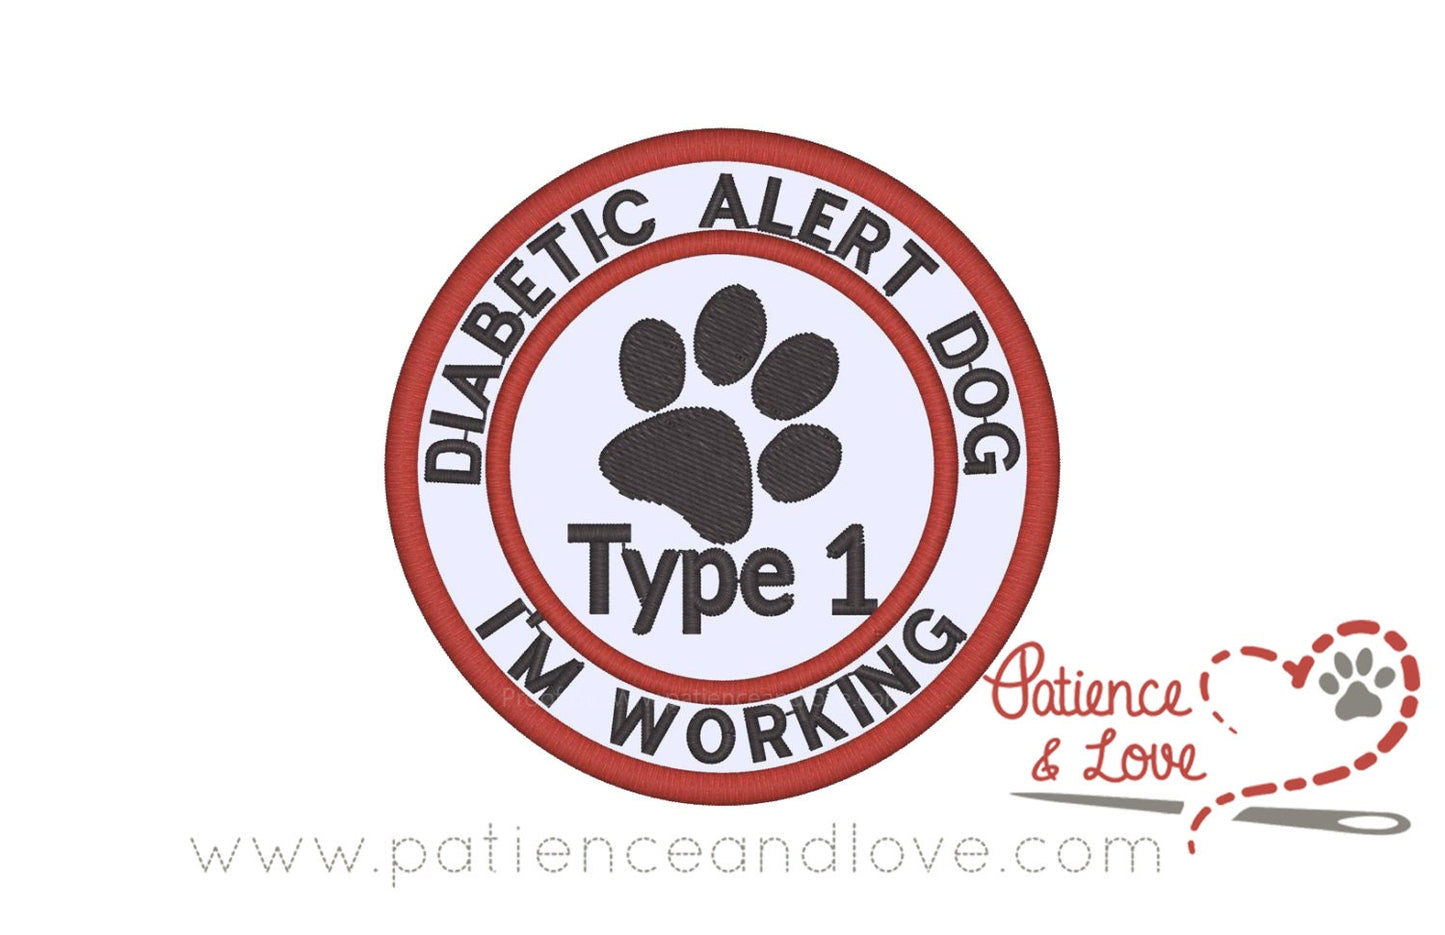 Type 1 Diabetic Alert Dog- I'm Working, with paw, 3 inch round patch